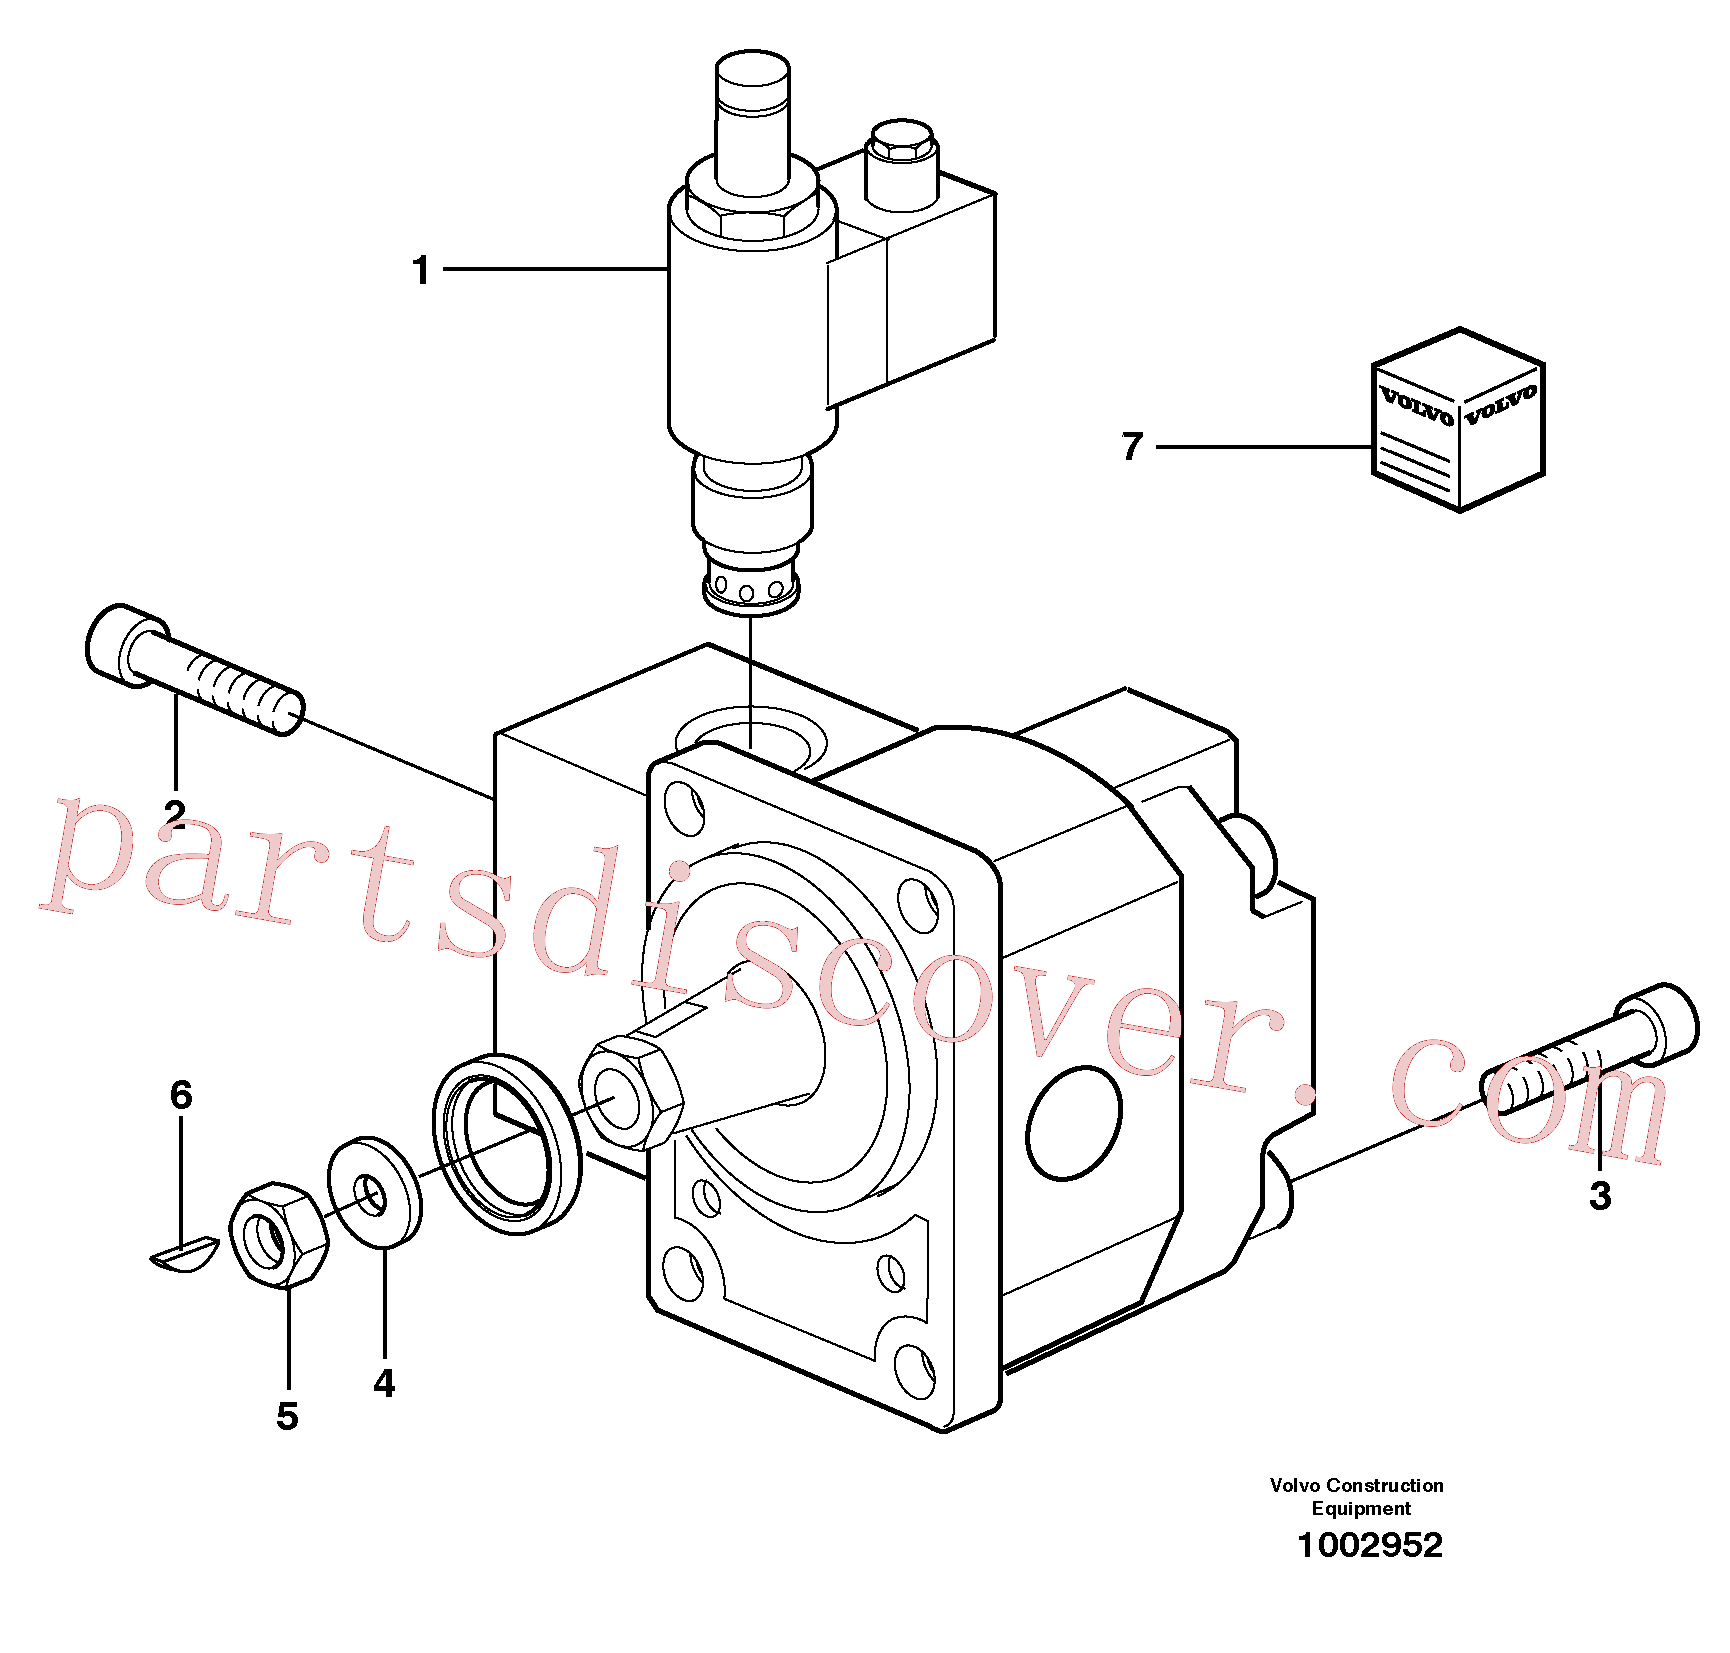 SA9286-19000 for Volvo Hydraulic motor(1002952 assembly)